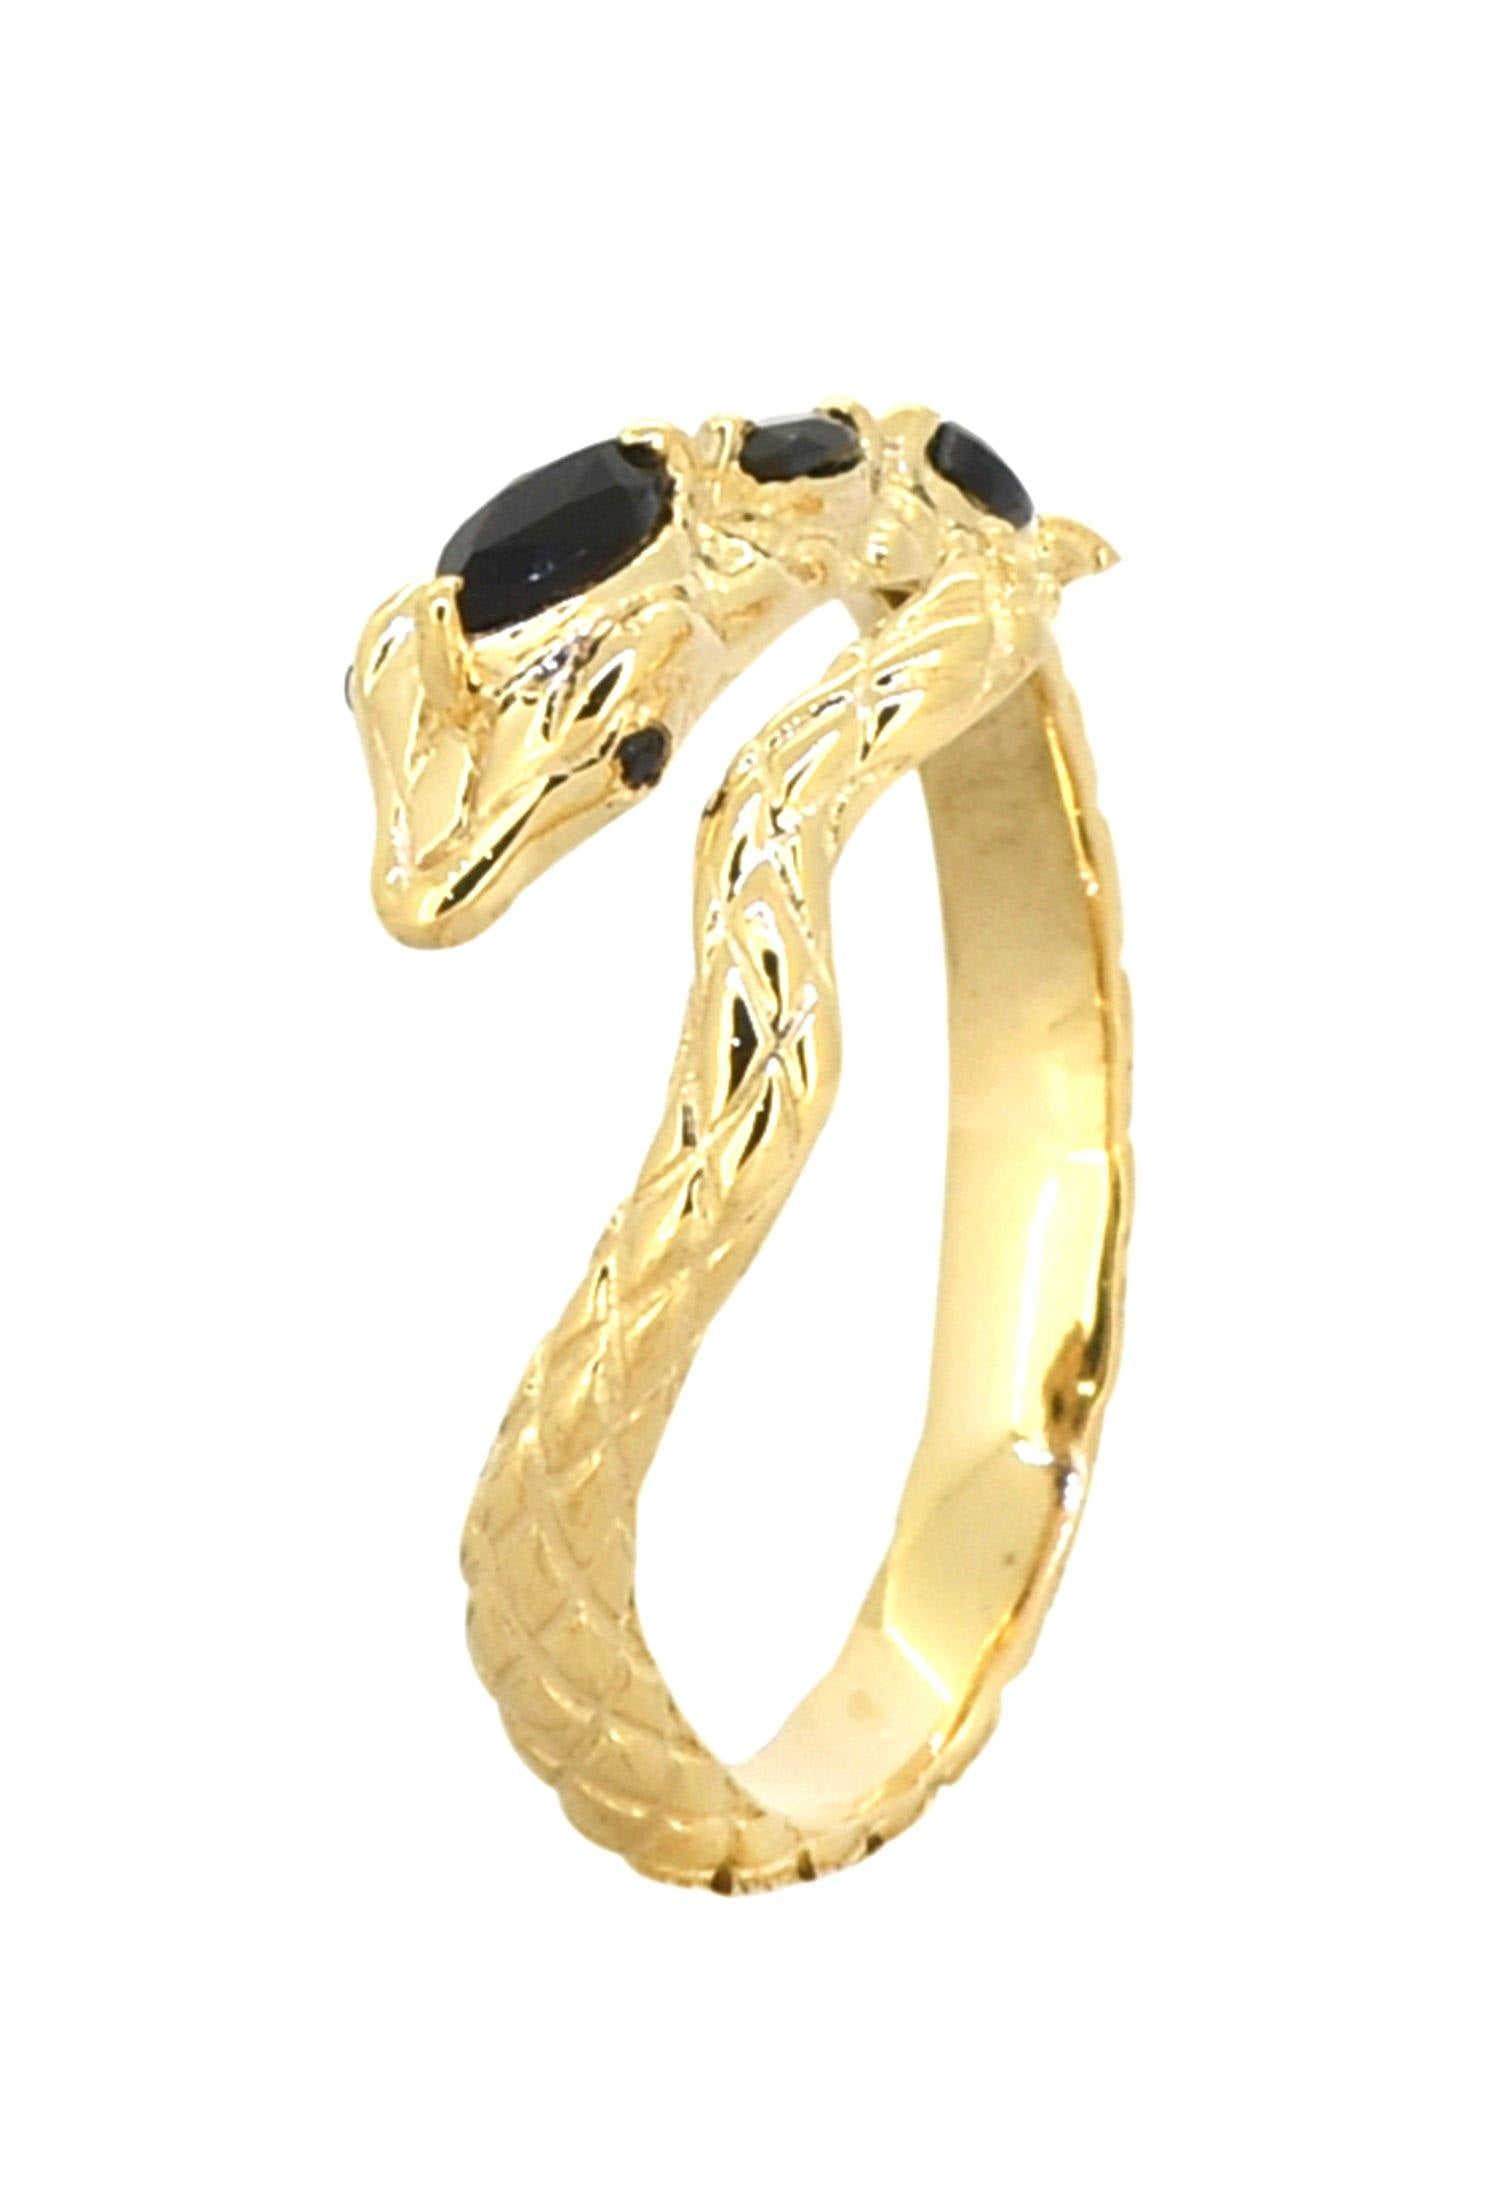 Black Onyx Solid 925 Sterling Silver Gold Plated Snake Ring Genuine Gemstone Jewelry - YoTreasure